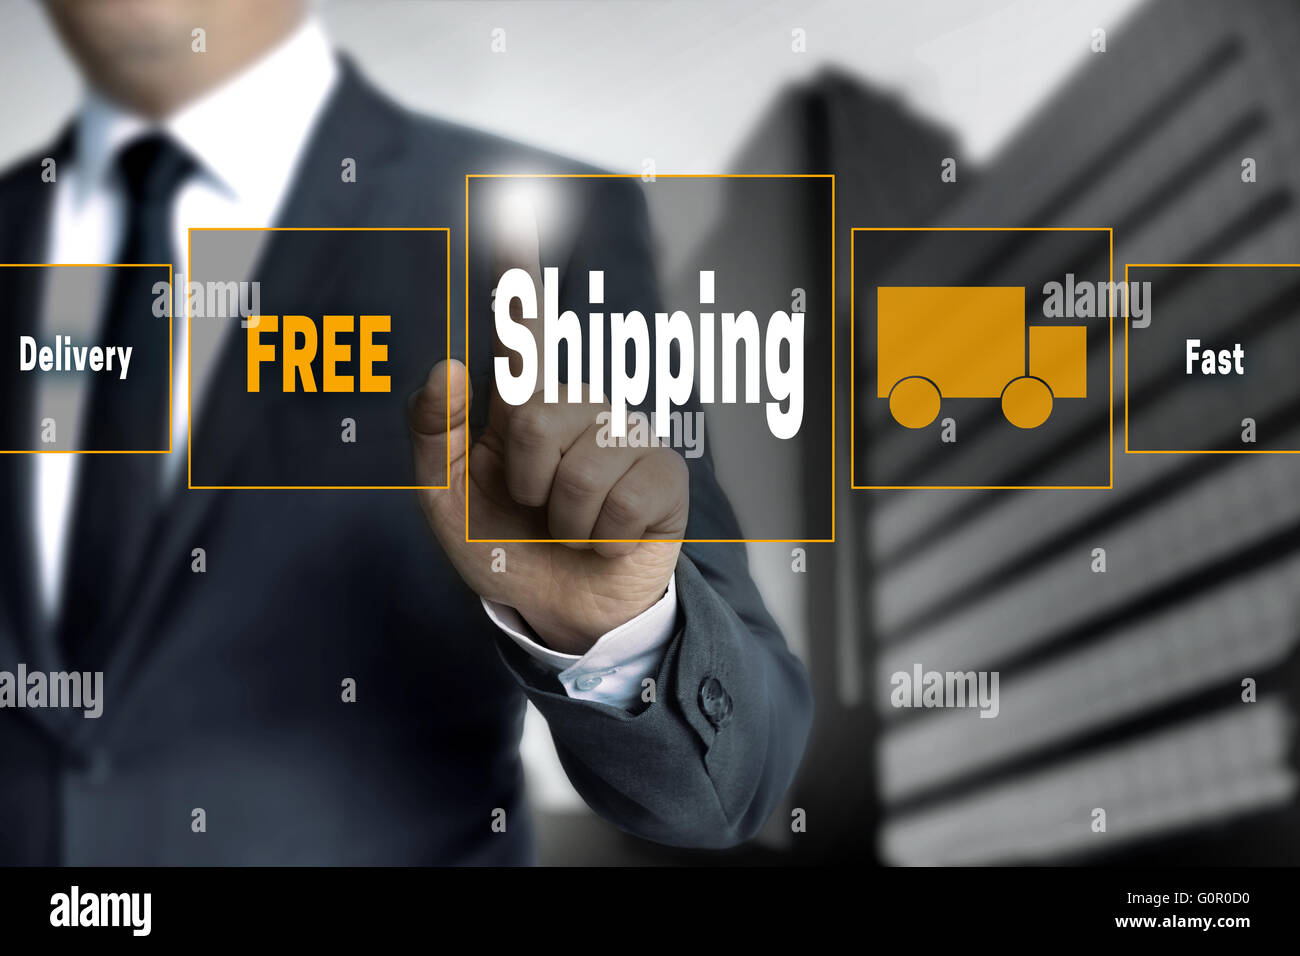 free shipping touchscreen is operated by businessman. Stock Photo